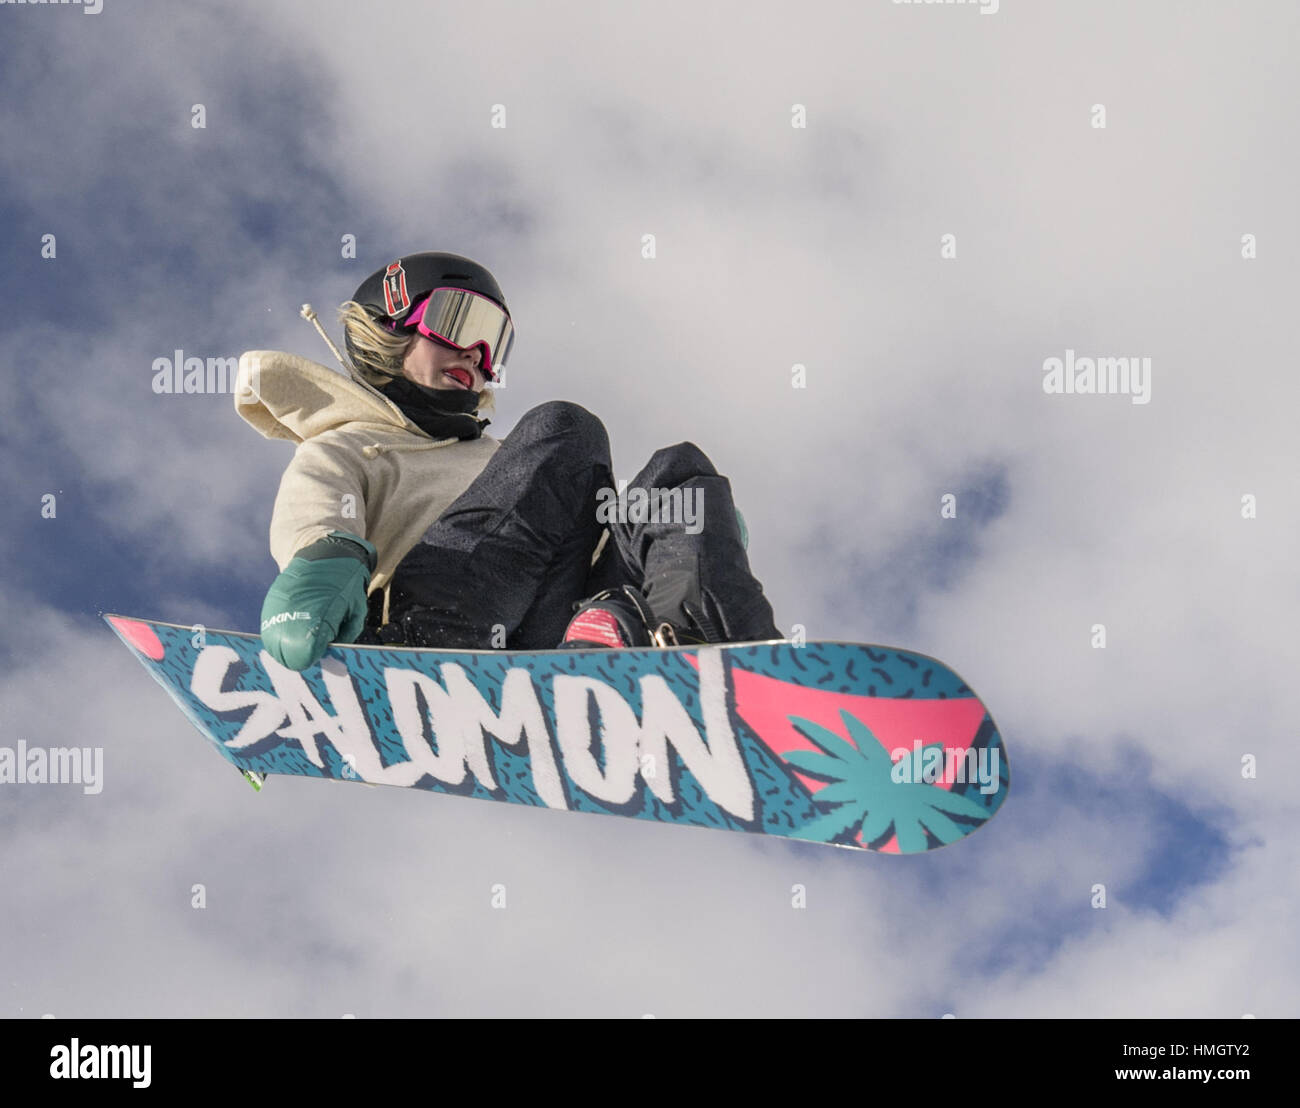 Aspen CO, USA. 26th Jan, 2017. MADDIE MASTRO flys through the air during the warm up for the women's snowboard halfpipe during Day 1 of Winter X Games 2017 at Colorado's Buttermilk Mountain. Credit: Marshall Foster/ZUMA Wire/Alamy Live News Stock Photo